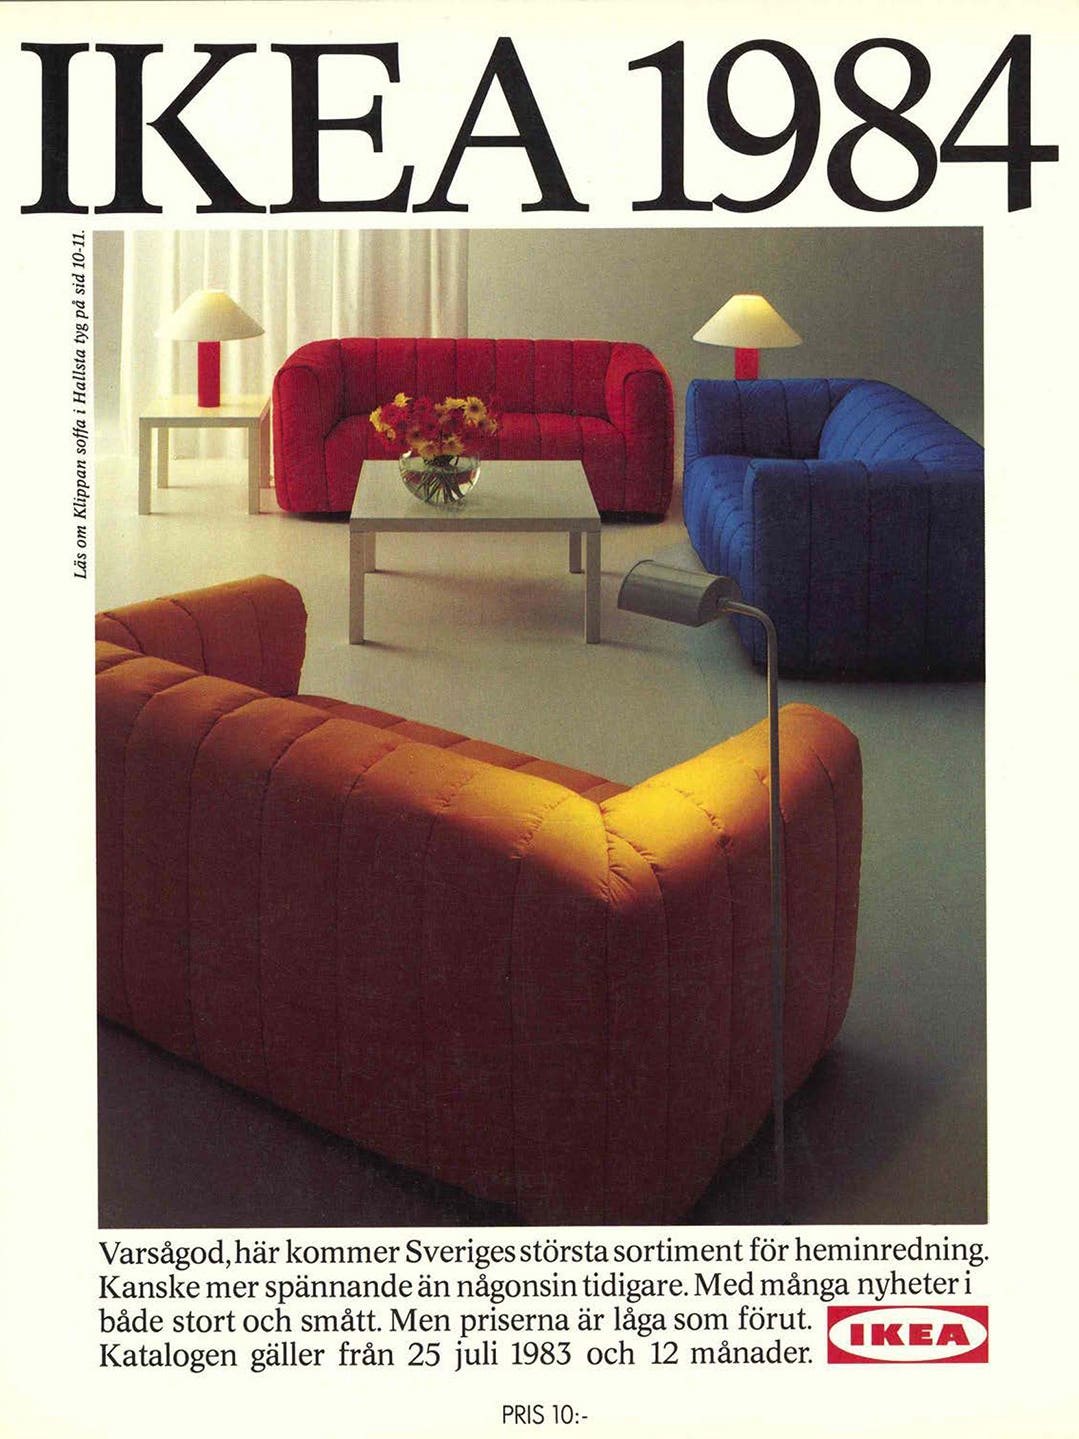 Cover of the IKEA catalog in 1984 with 3 sofas